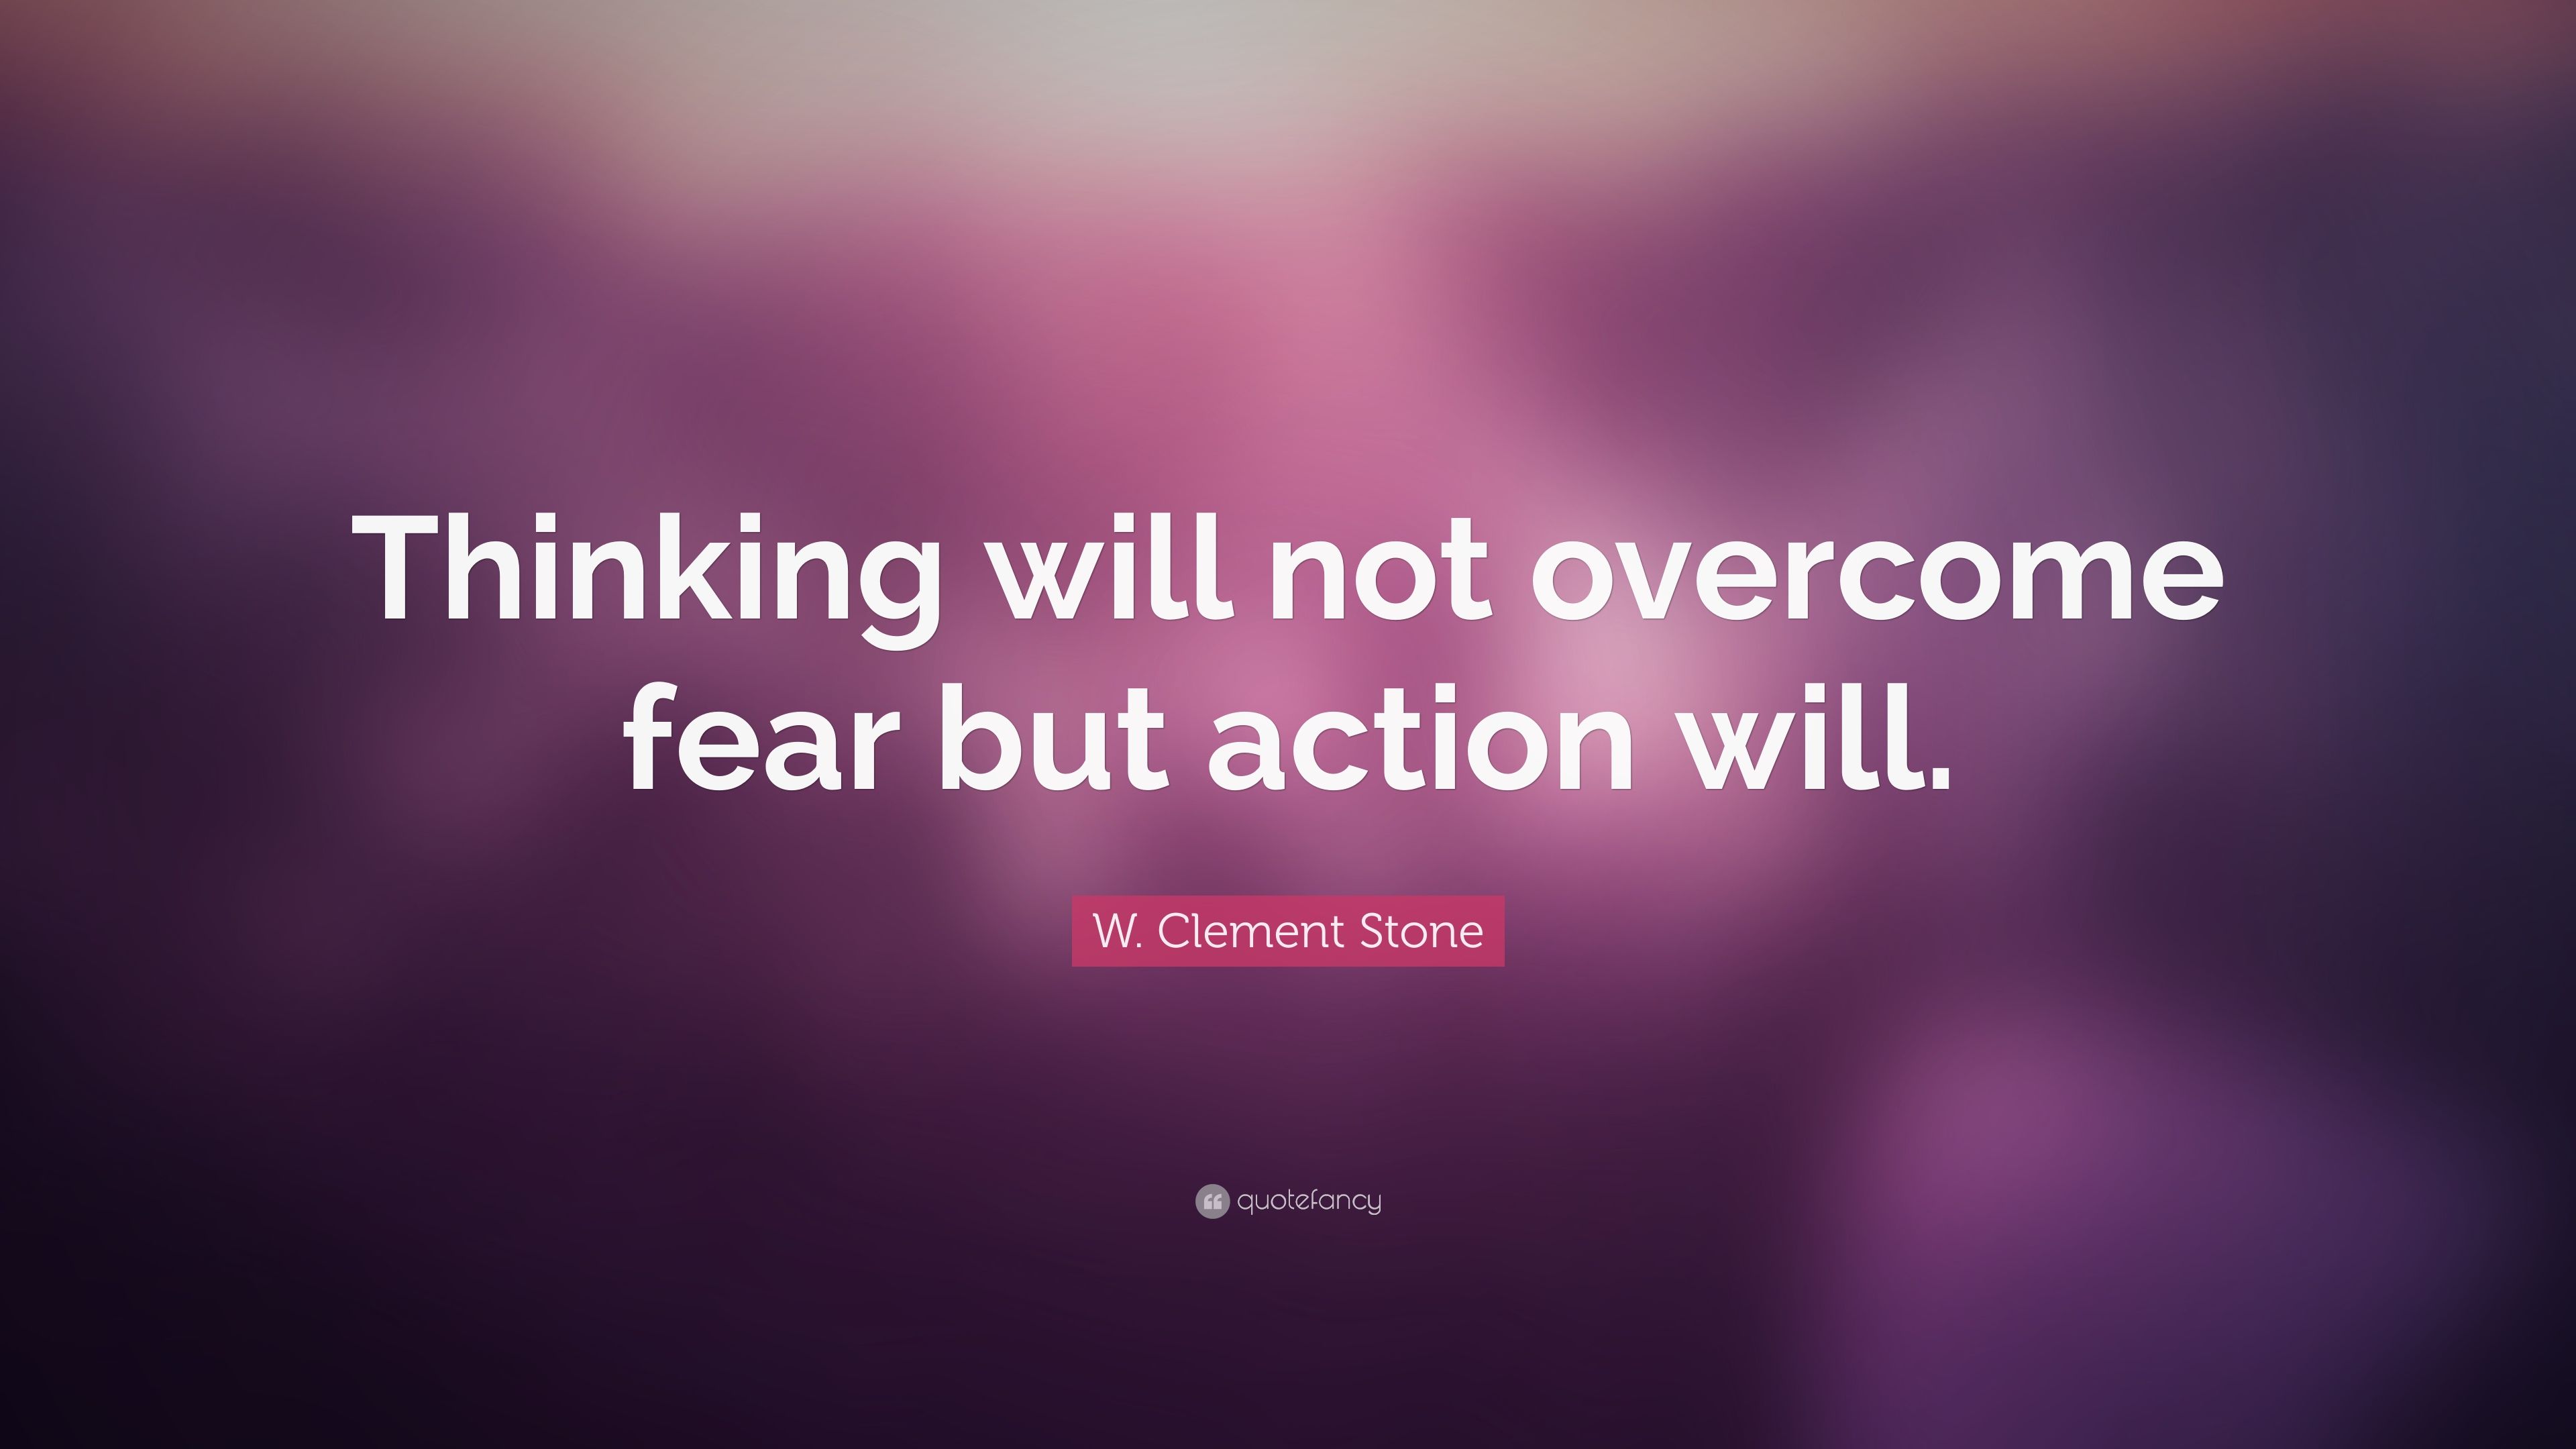 W. Clement Stone Quote: “Thinking will not overcome fear but ...